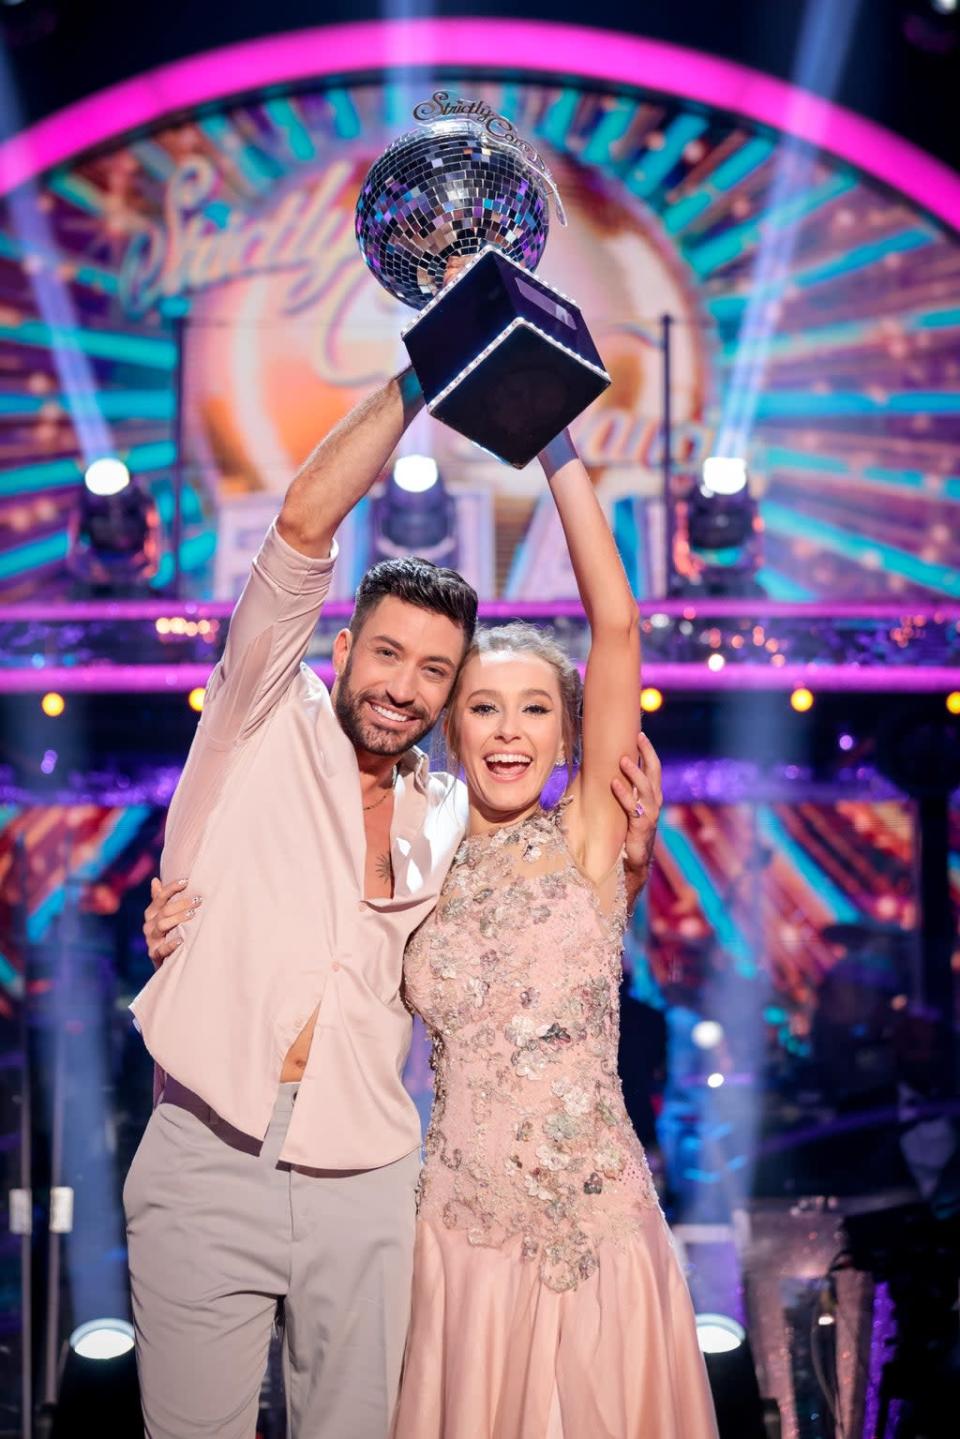 Giovanni Pernice and Rose Ayling-Ellis (Guy Levy/BBC)